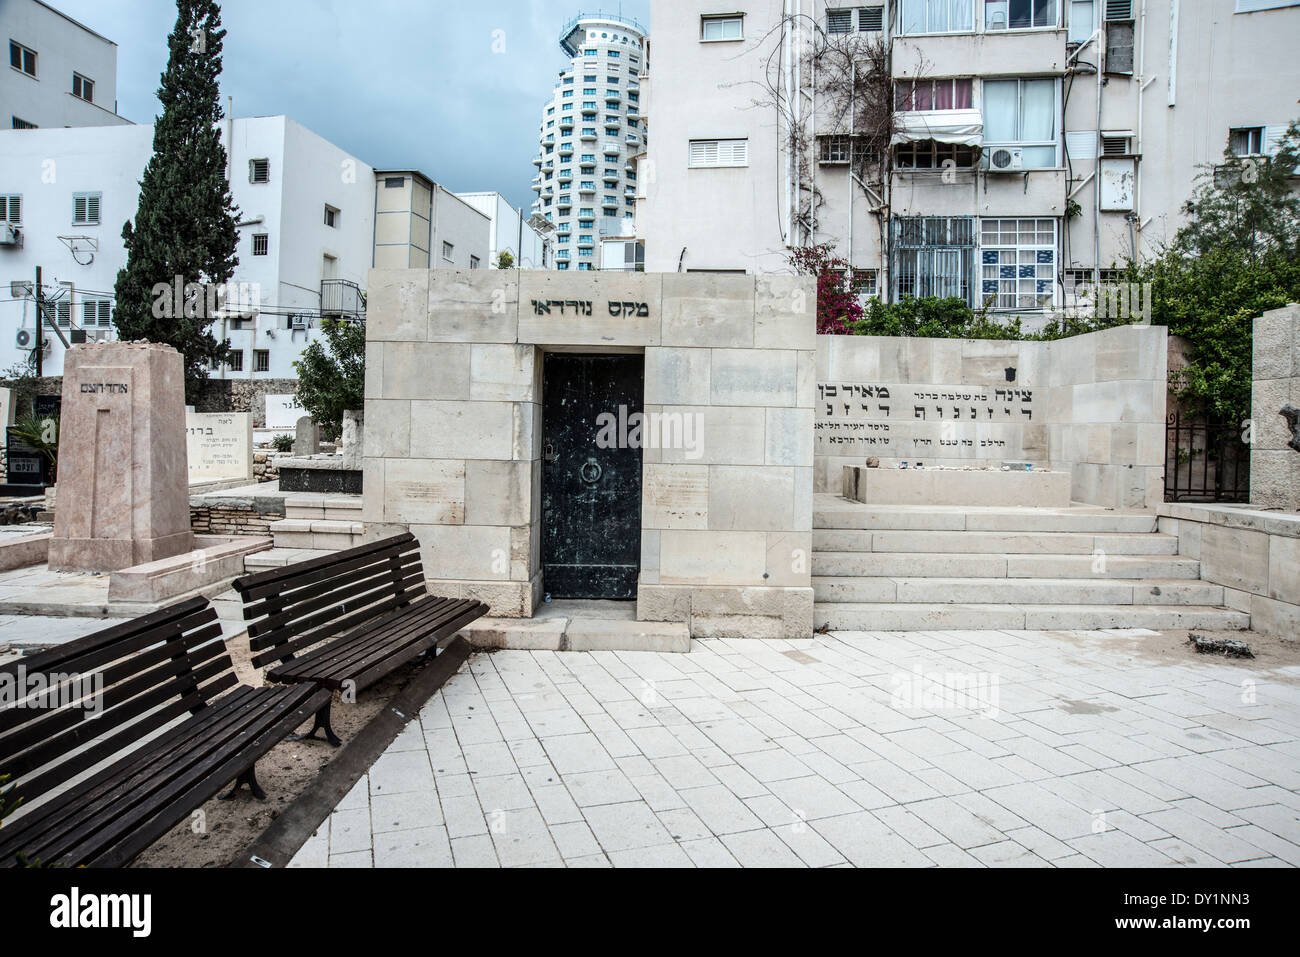 Meir and Zina Dizengoff (right) and Max Nordau (left) in the old cemetery in Trumpeldor street, Tel Aviv, Israel Stock Photo